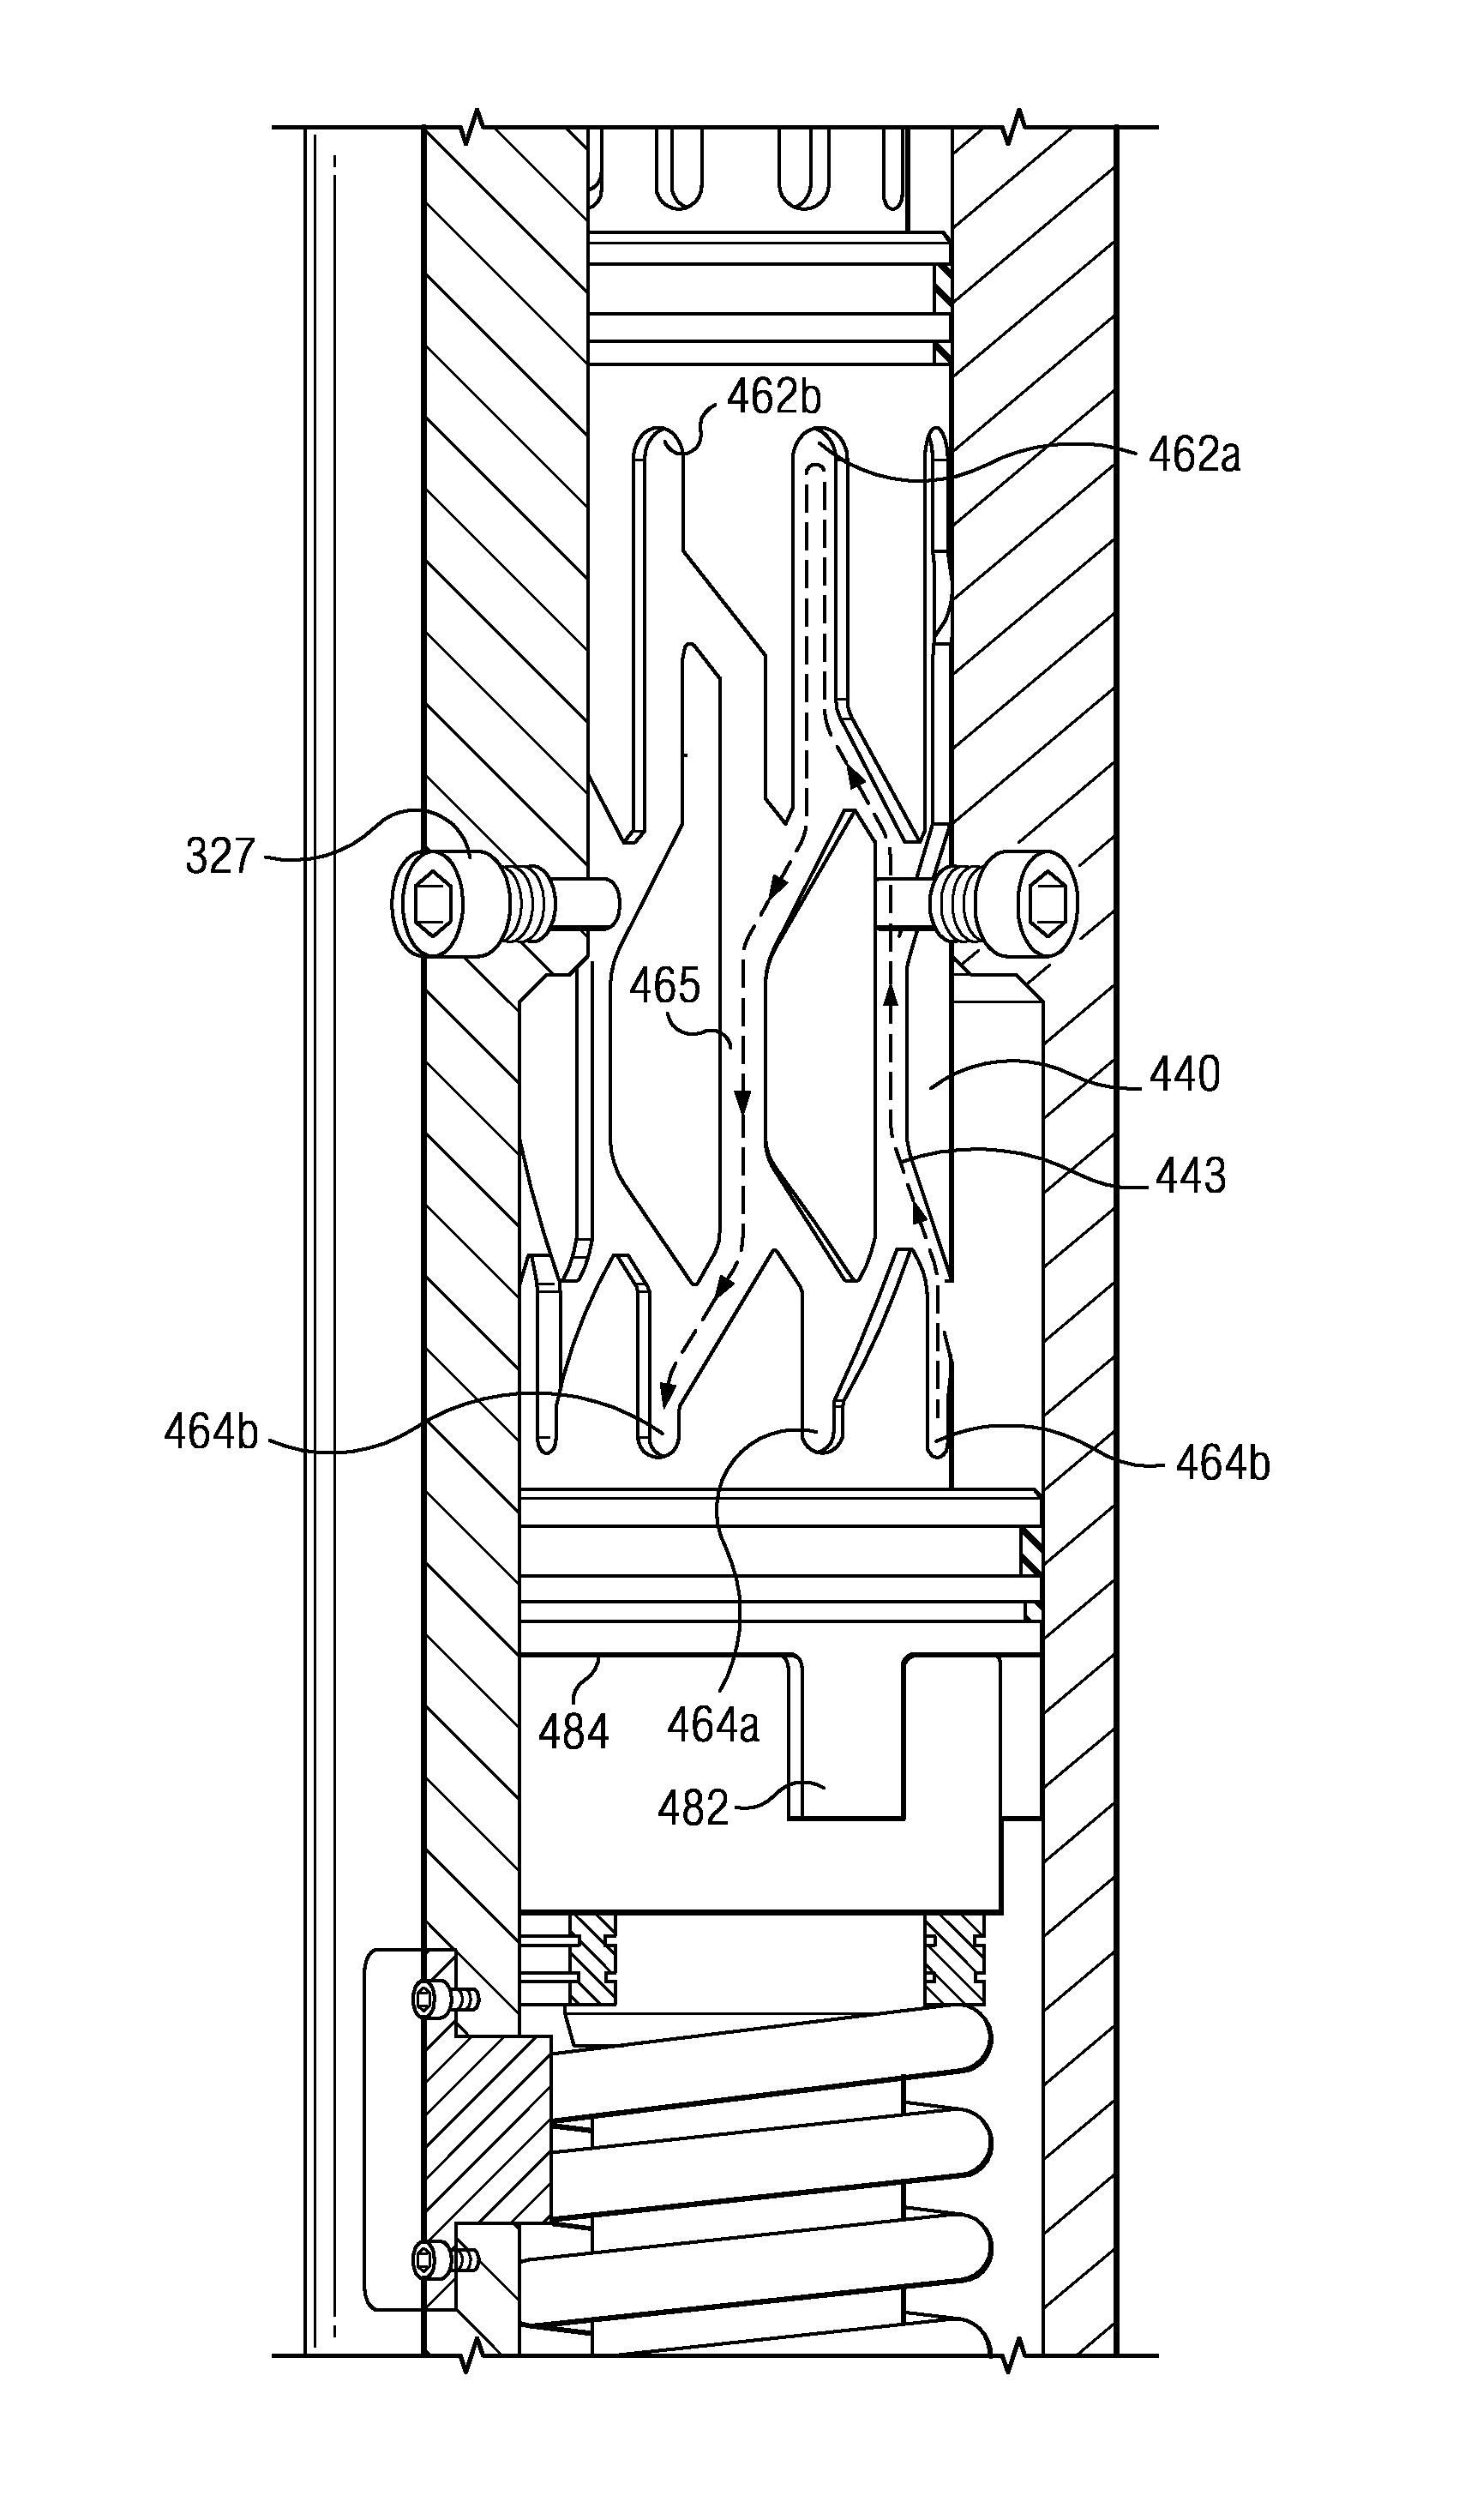 Hydraulic actuation of a downhole tool assembly